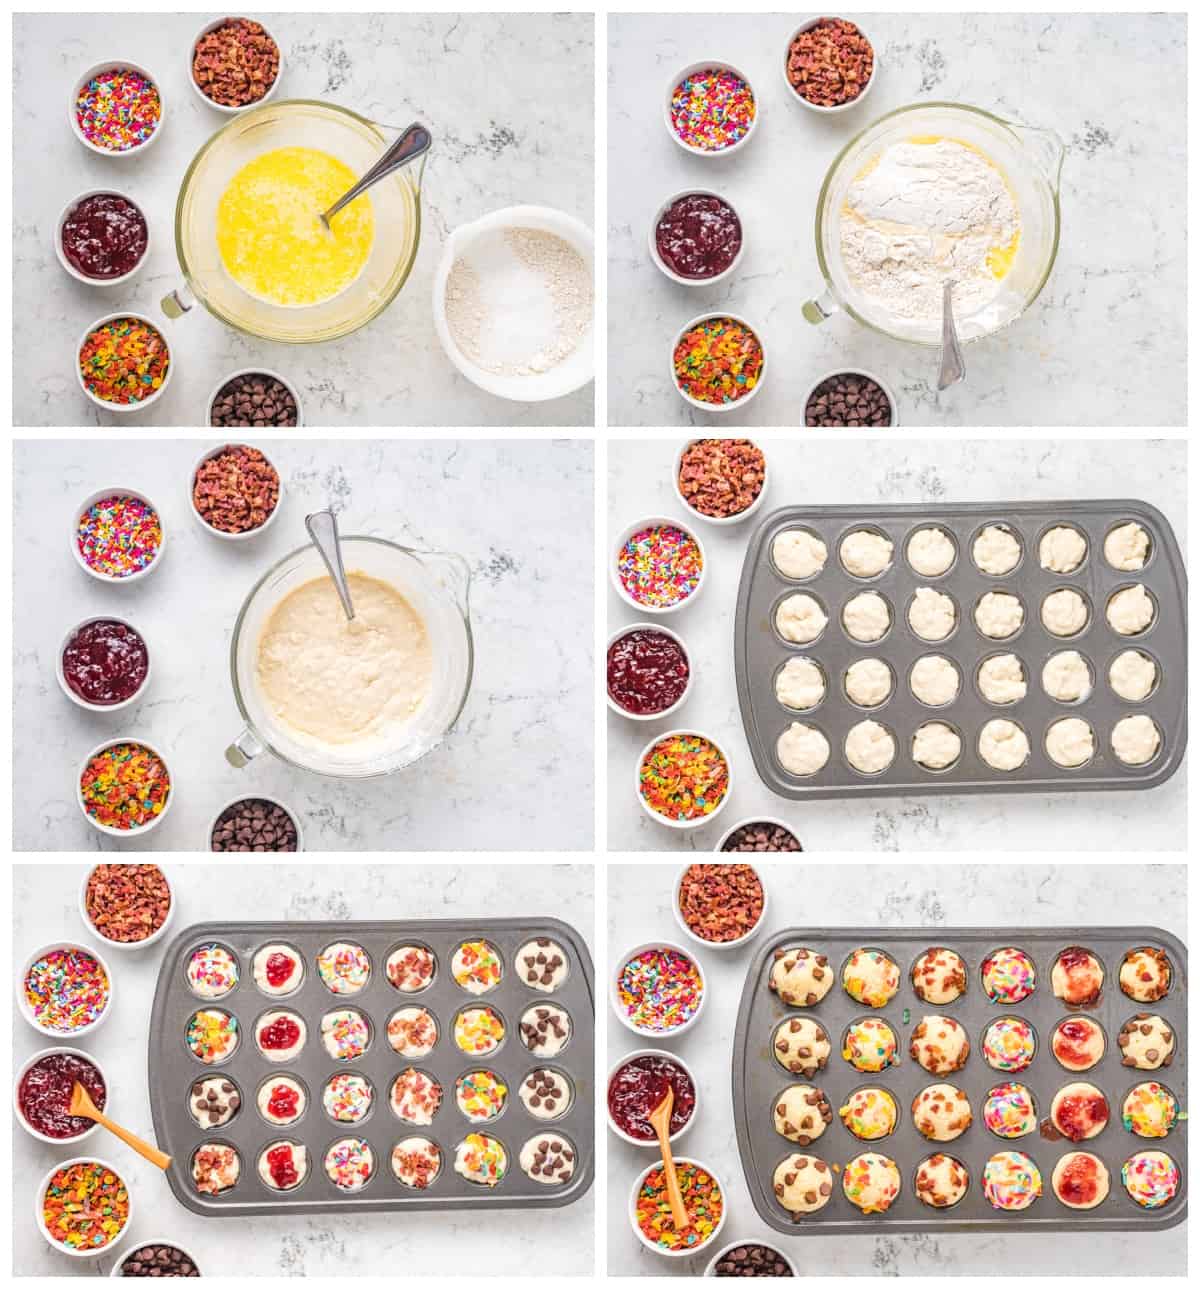 how to make pancake bites step by step photo instructions